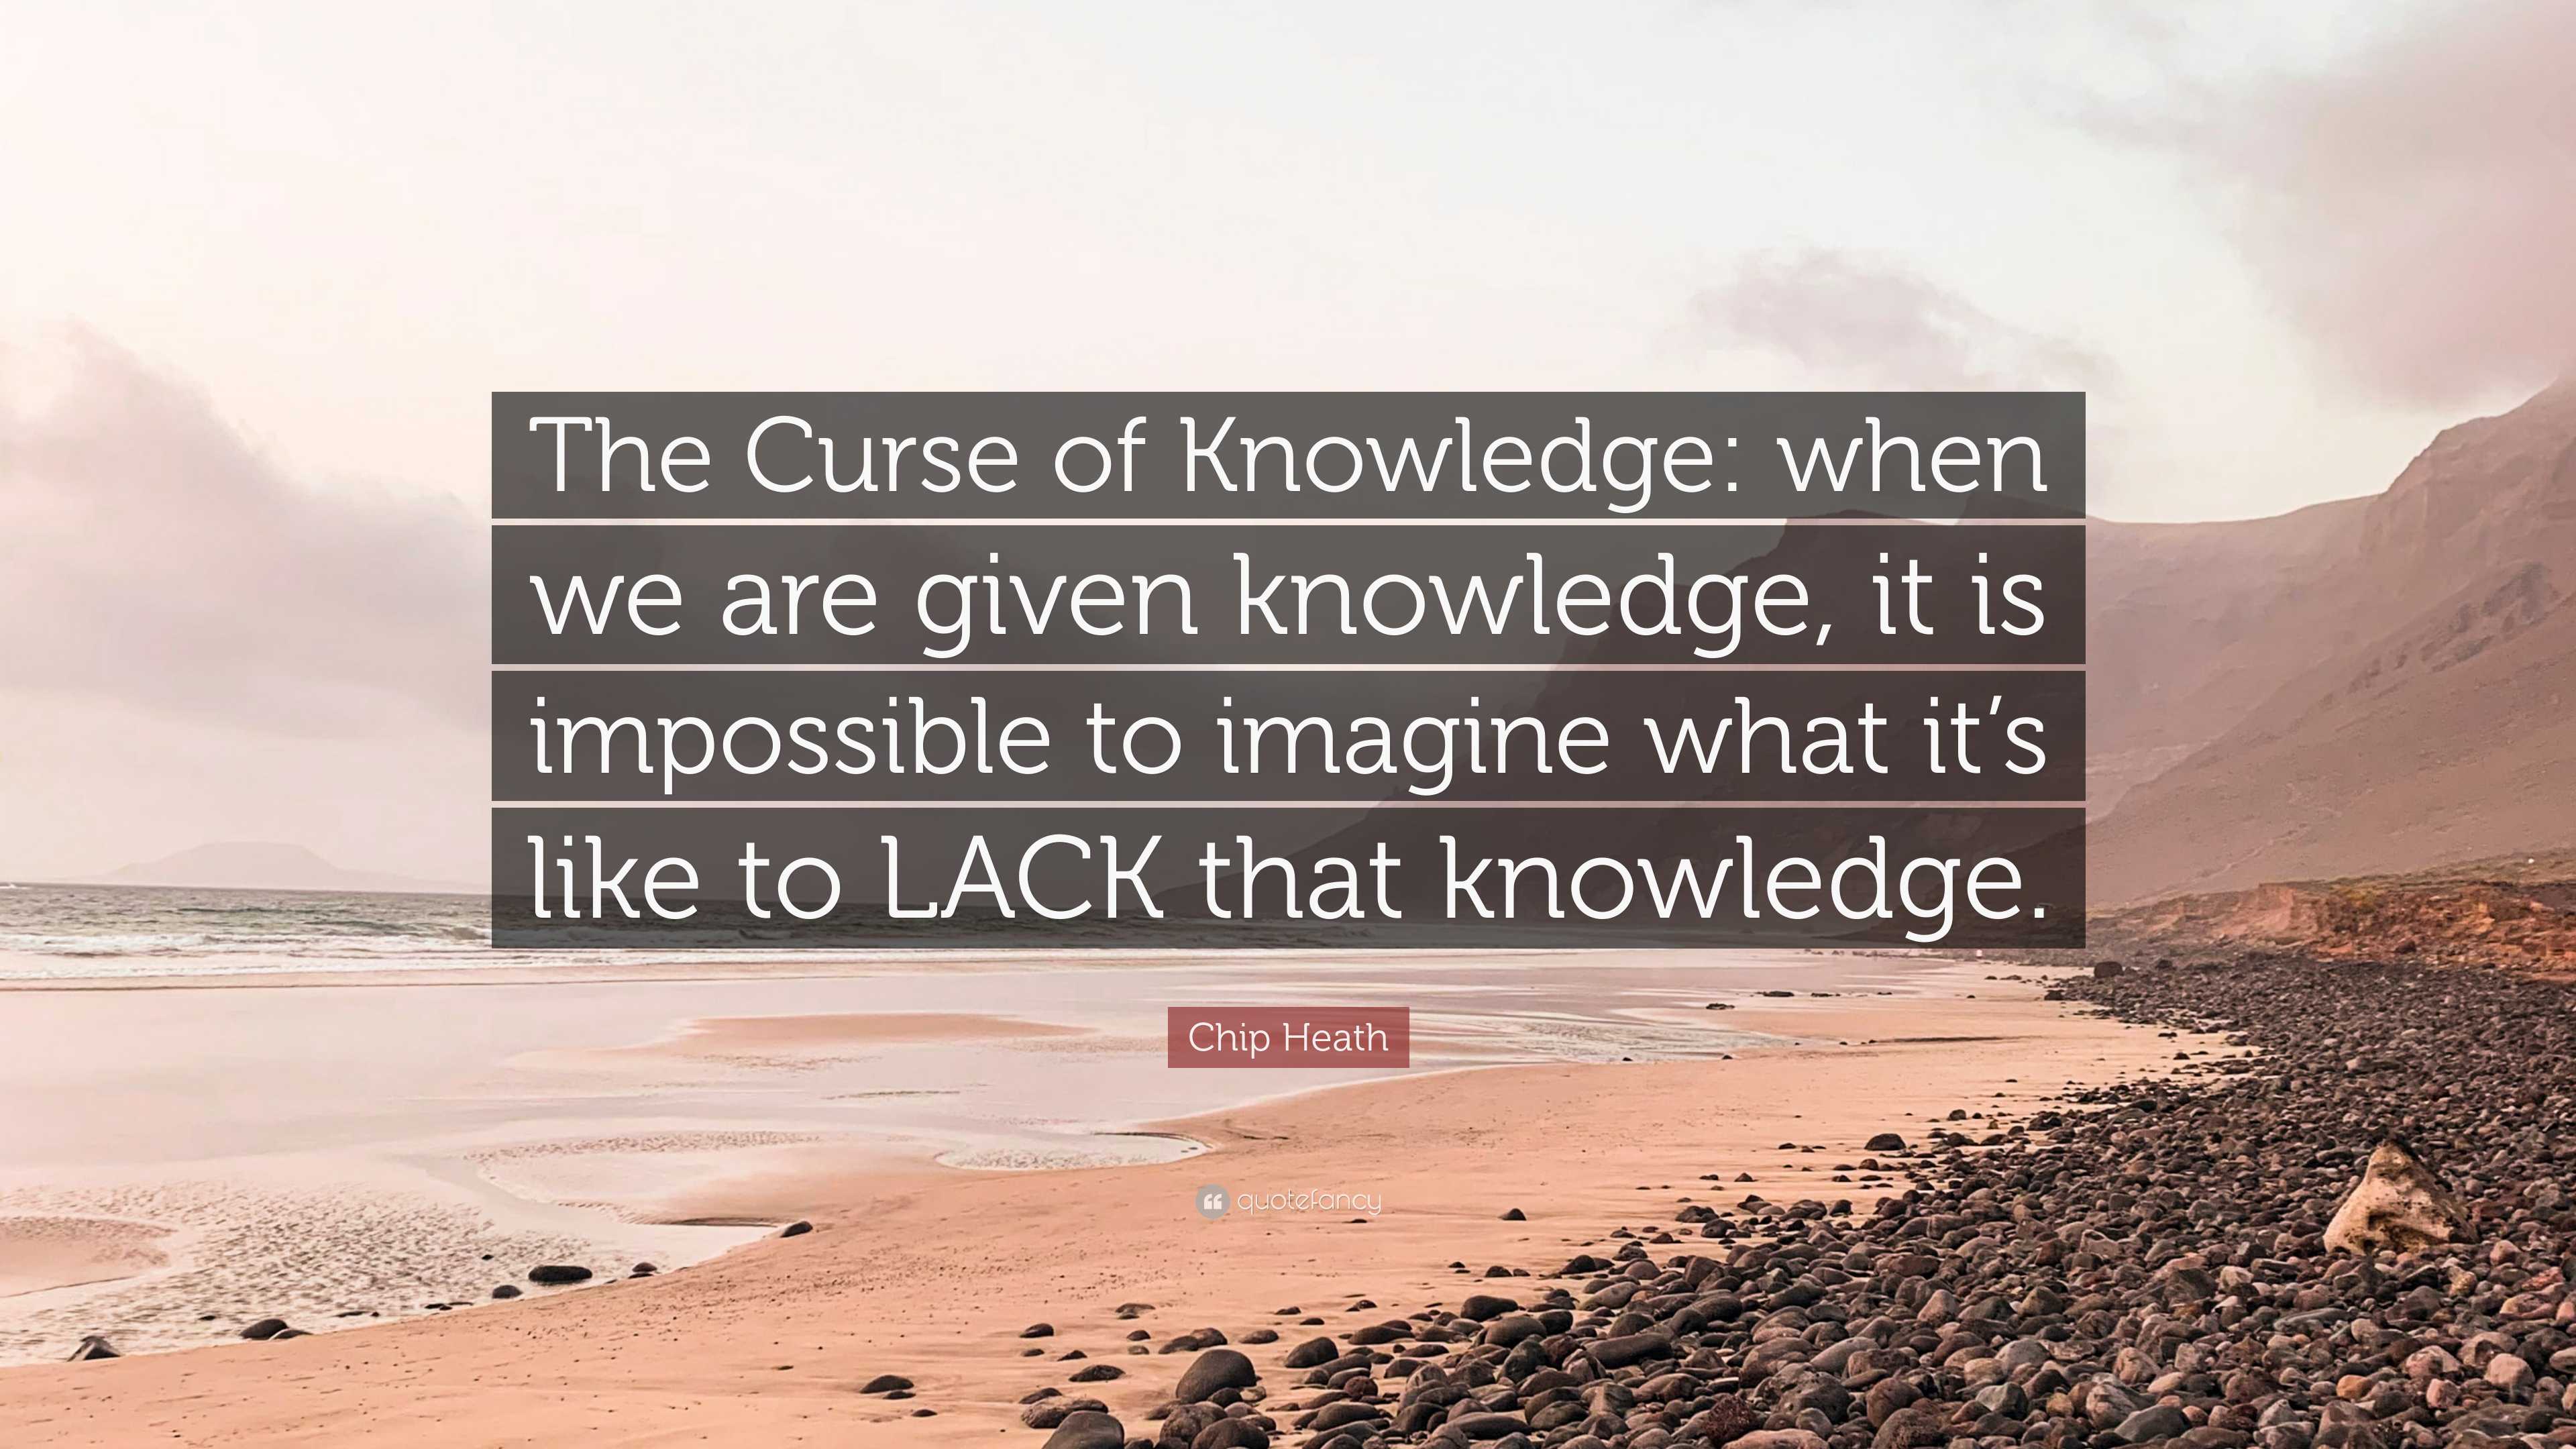 The Curse of Knowledge and How to Defeat It